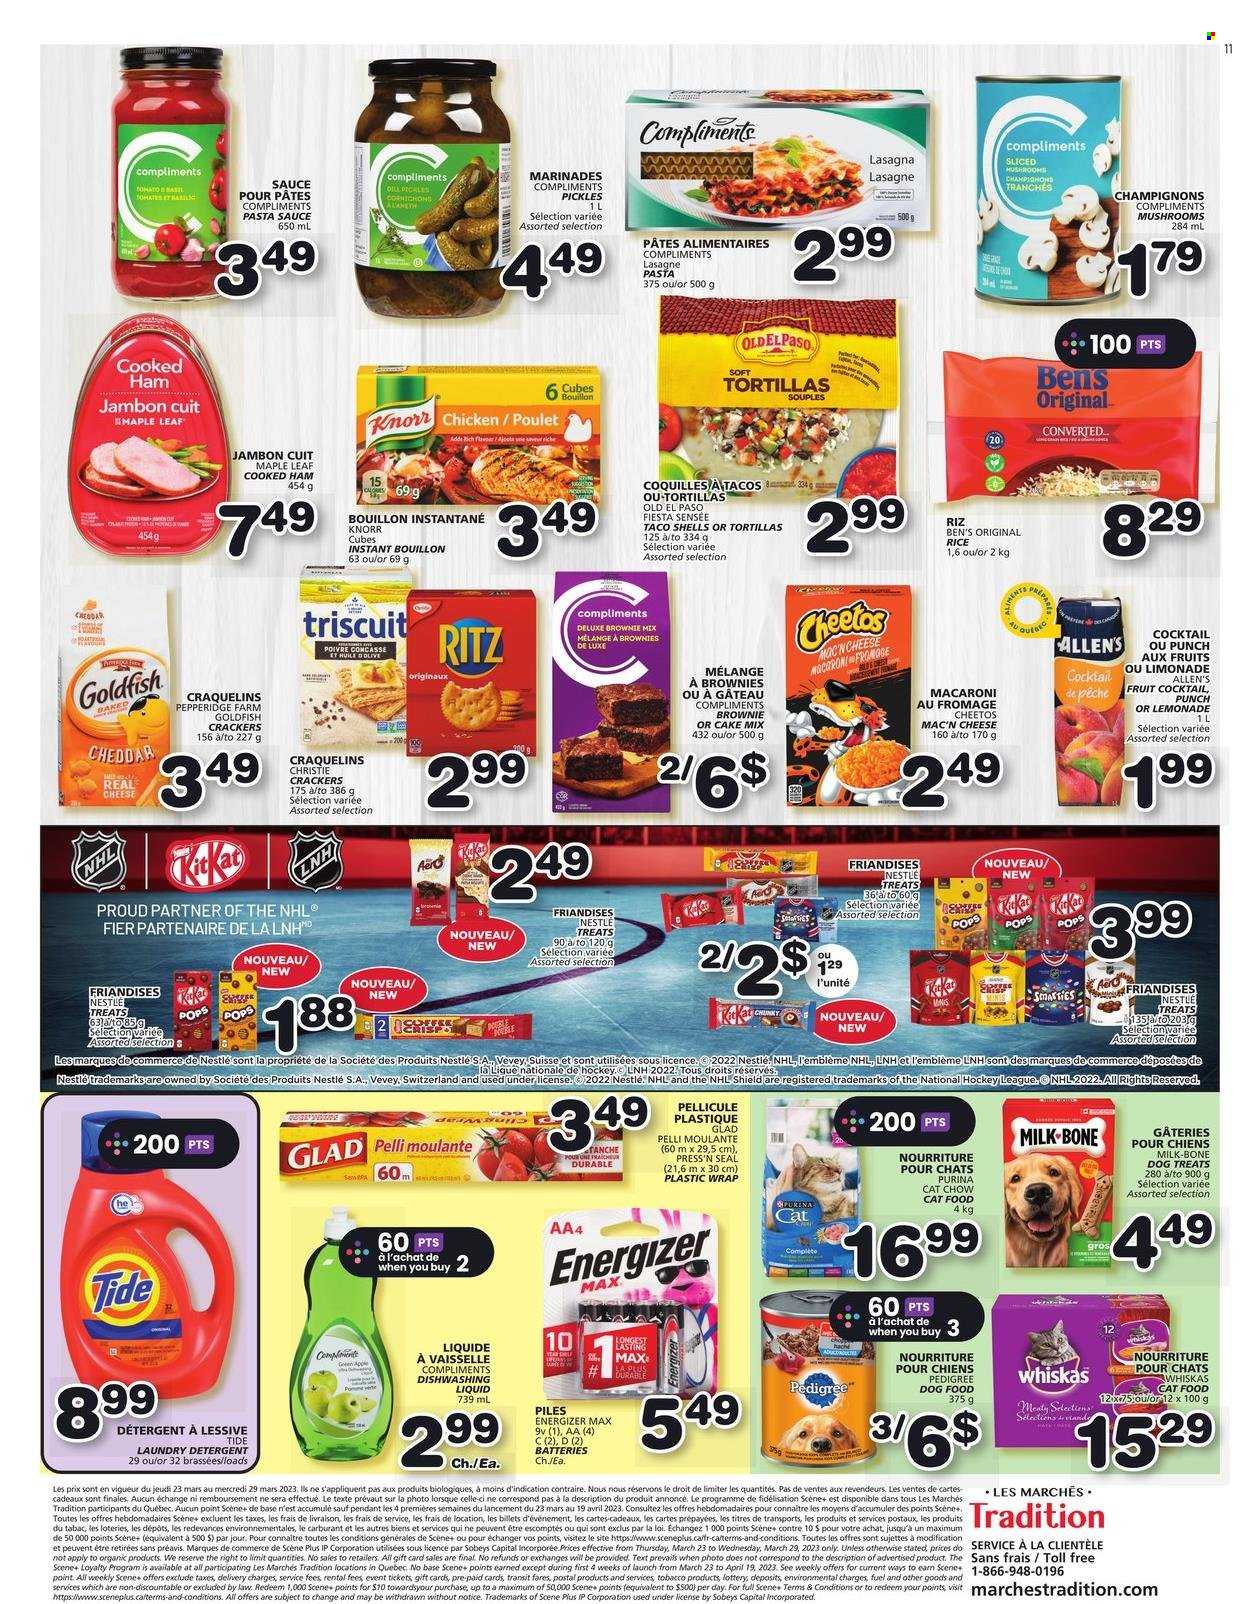 thumbnail - Les Marchés Tradition Flyer - March 23, 2023 - March 29, 2023 - Sales products - mushrooms, tortillas, Old El Paso, tacos, brownie mix, cake mix, pasta sauce, macaroni, cooked ham, ham, milk, Mars, KitKat, crackers, RITZ, Cheetos, Goldfish, bouillon, pickles, rice, lemonade, punch, chicken, Tide, laundry detergent, dishwashing liquid, animal food, cat food, dog food, Purina, Pedigree, detergent, Energizer, Nestlé, Knorr, Whiskas, Smarties. Page 8.